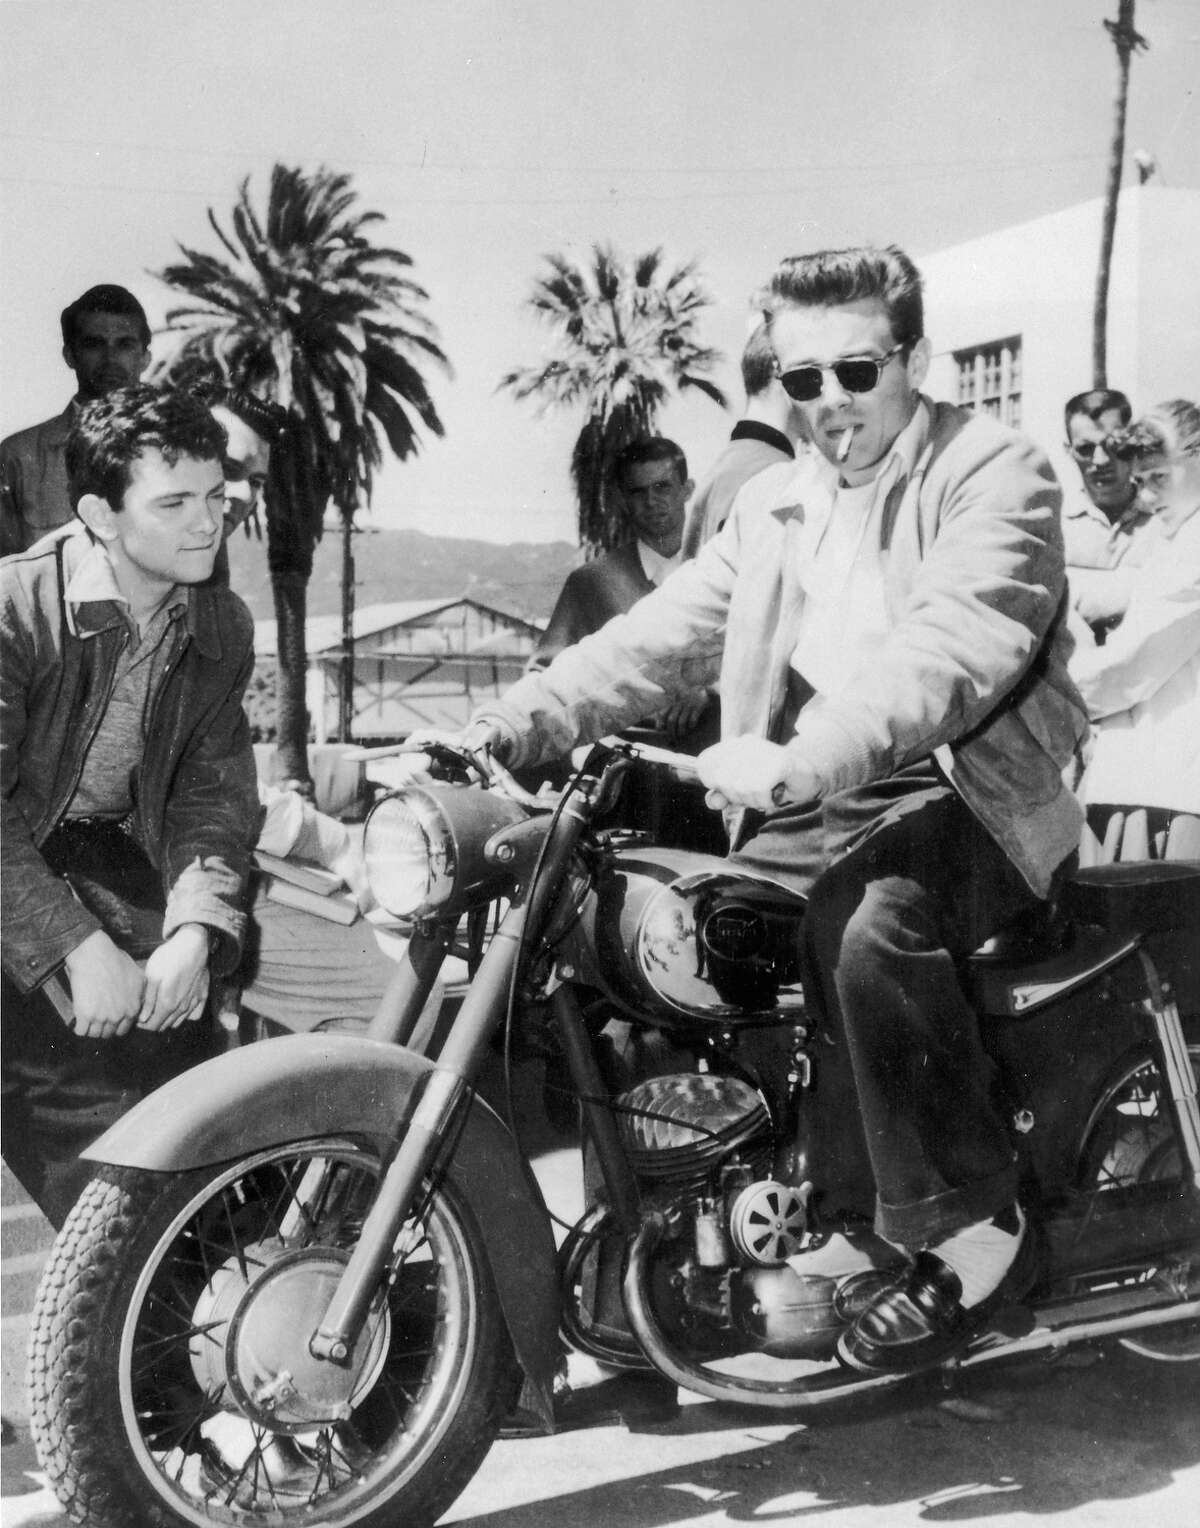 James Dean loved all things fast.